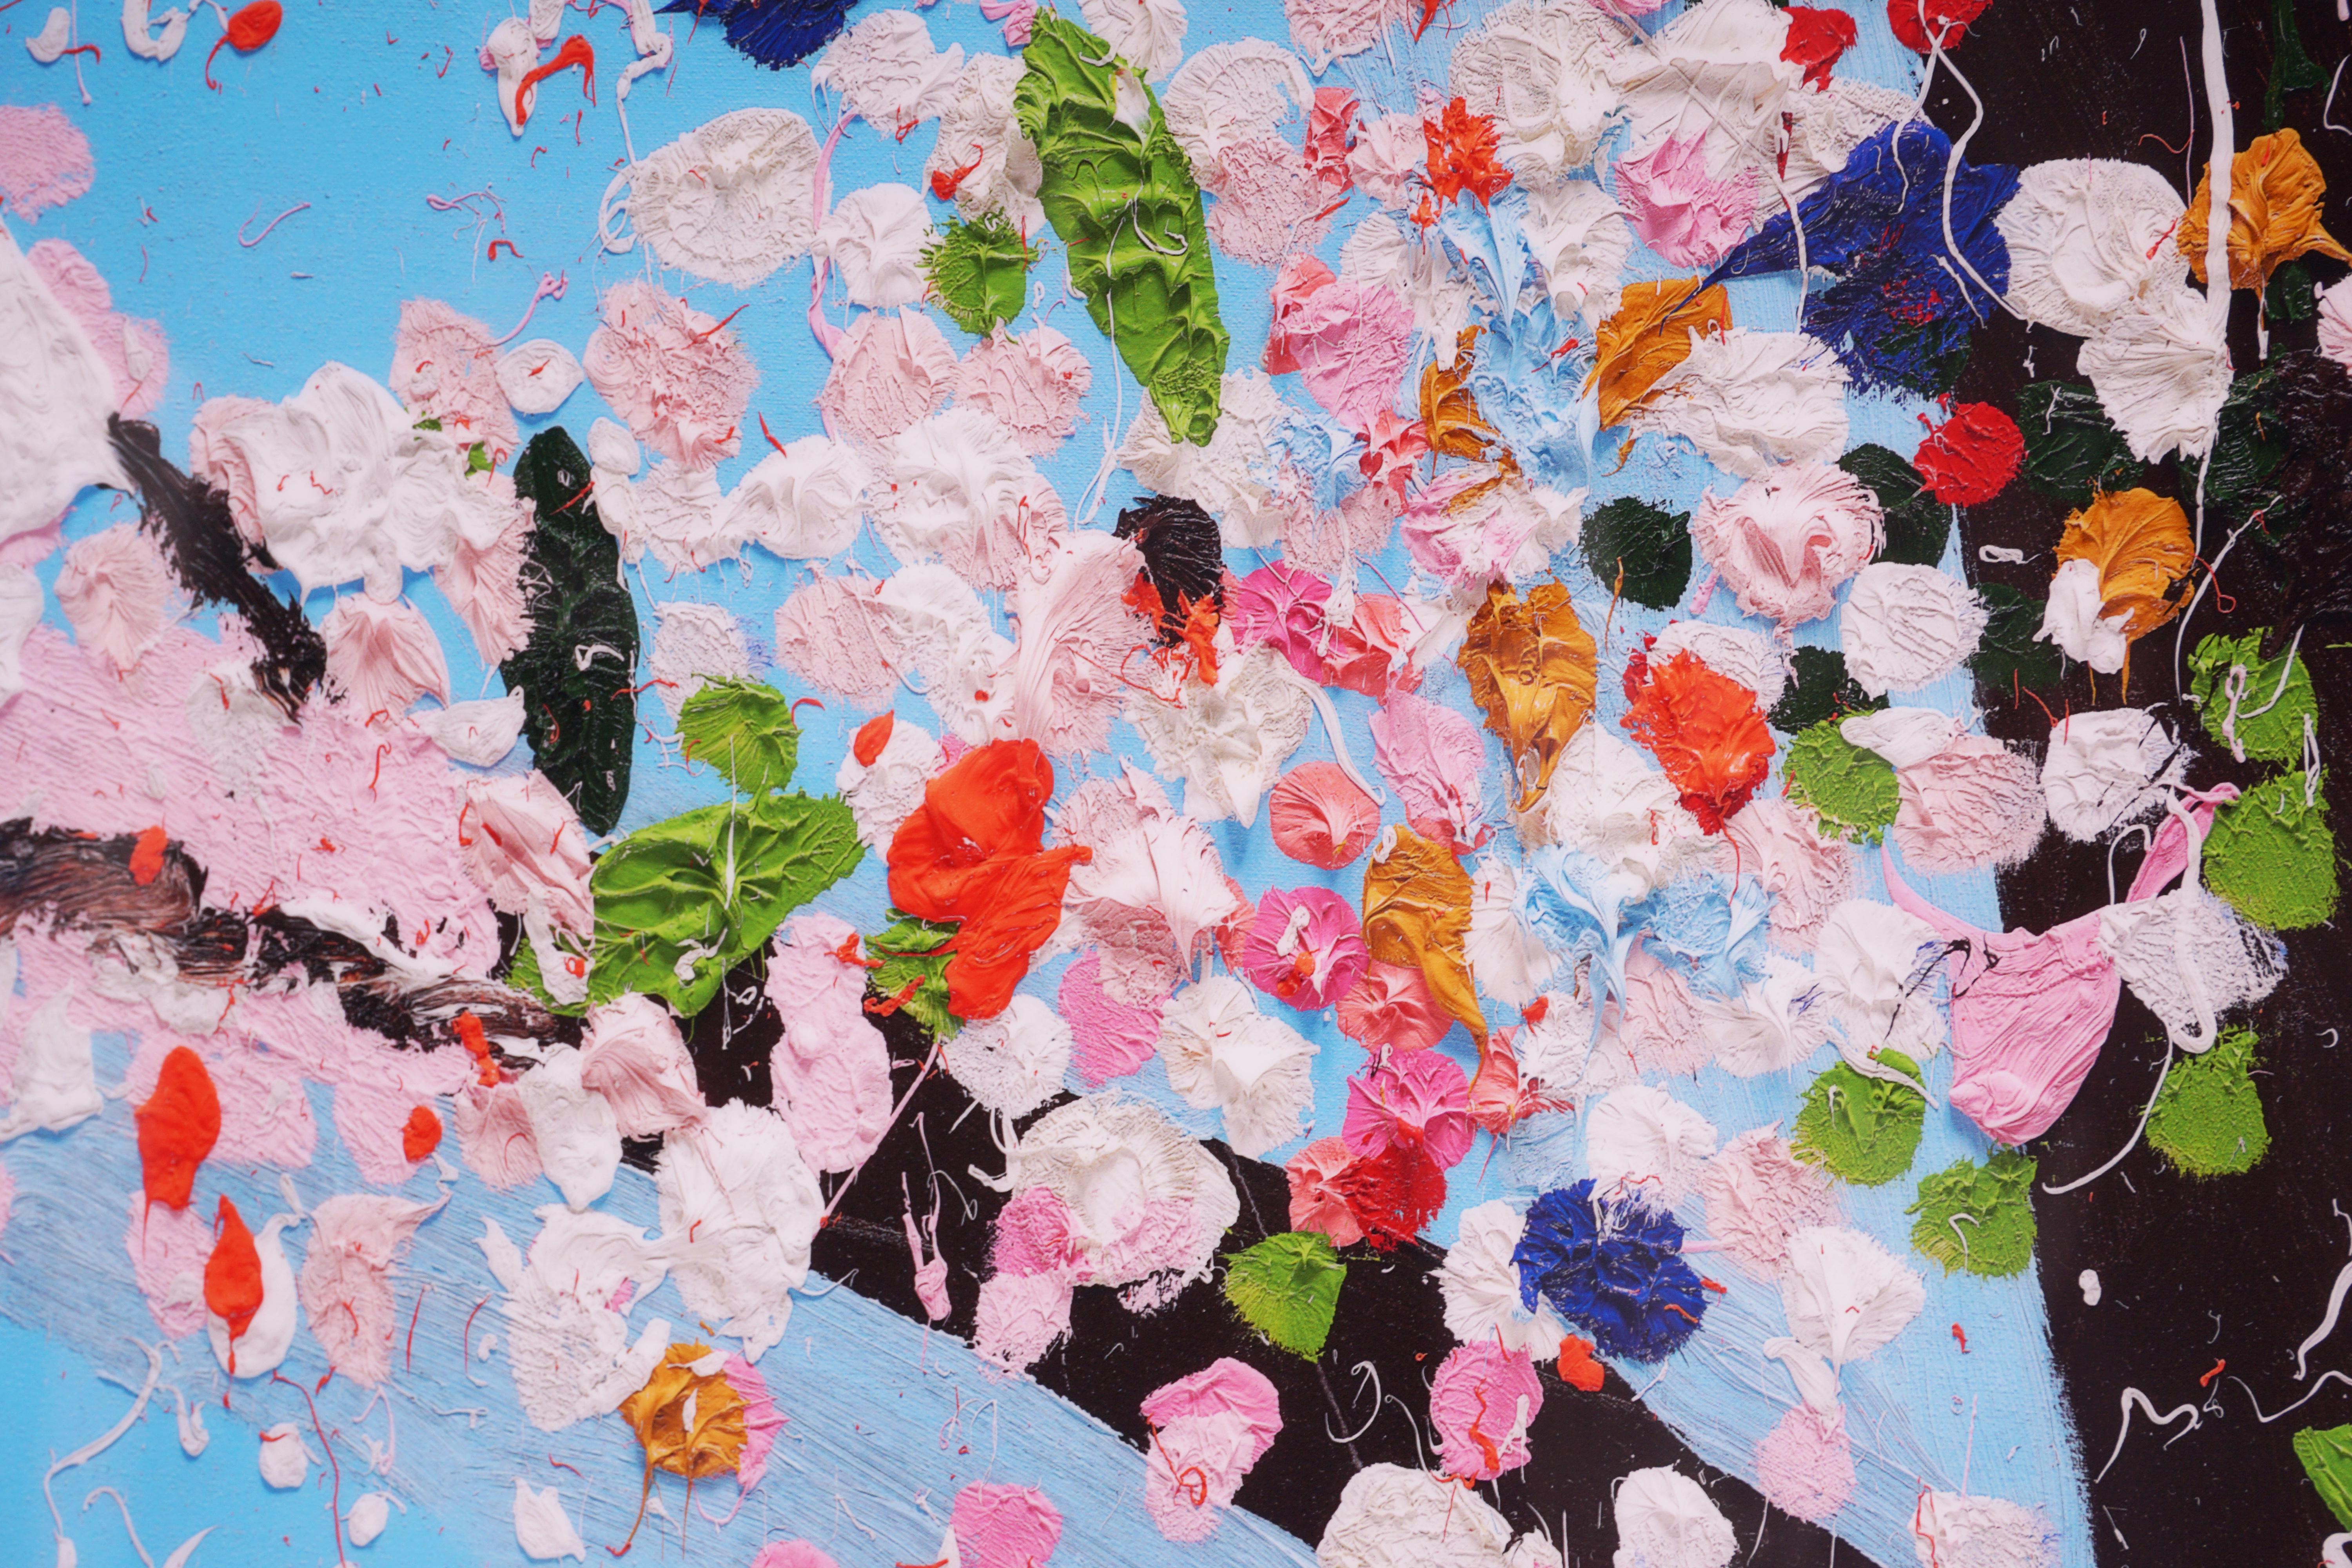 The contemporary pop art cherry blossom landscape ‘Honour' is one of the eight from the iconic ‘Virtues’ series by Damien Hirst, the laminated giclée print on aluminum panel was created in 2021 as a reflection of his latest exploration as a master